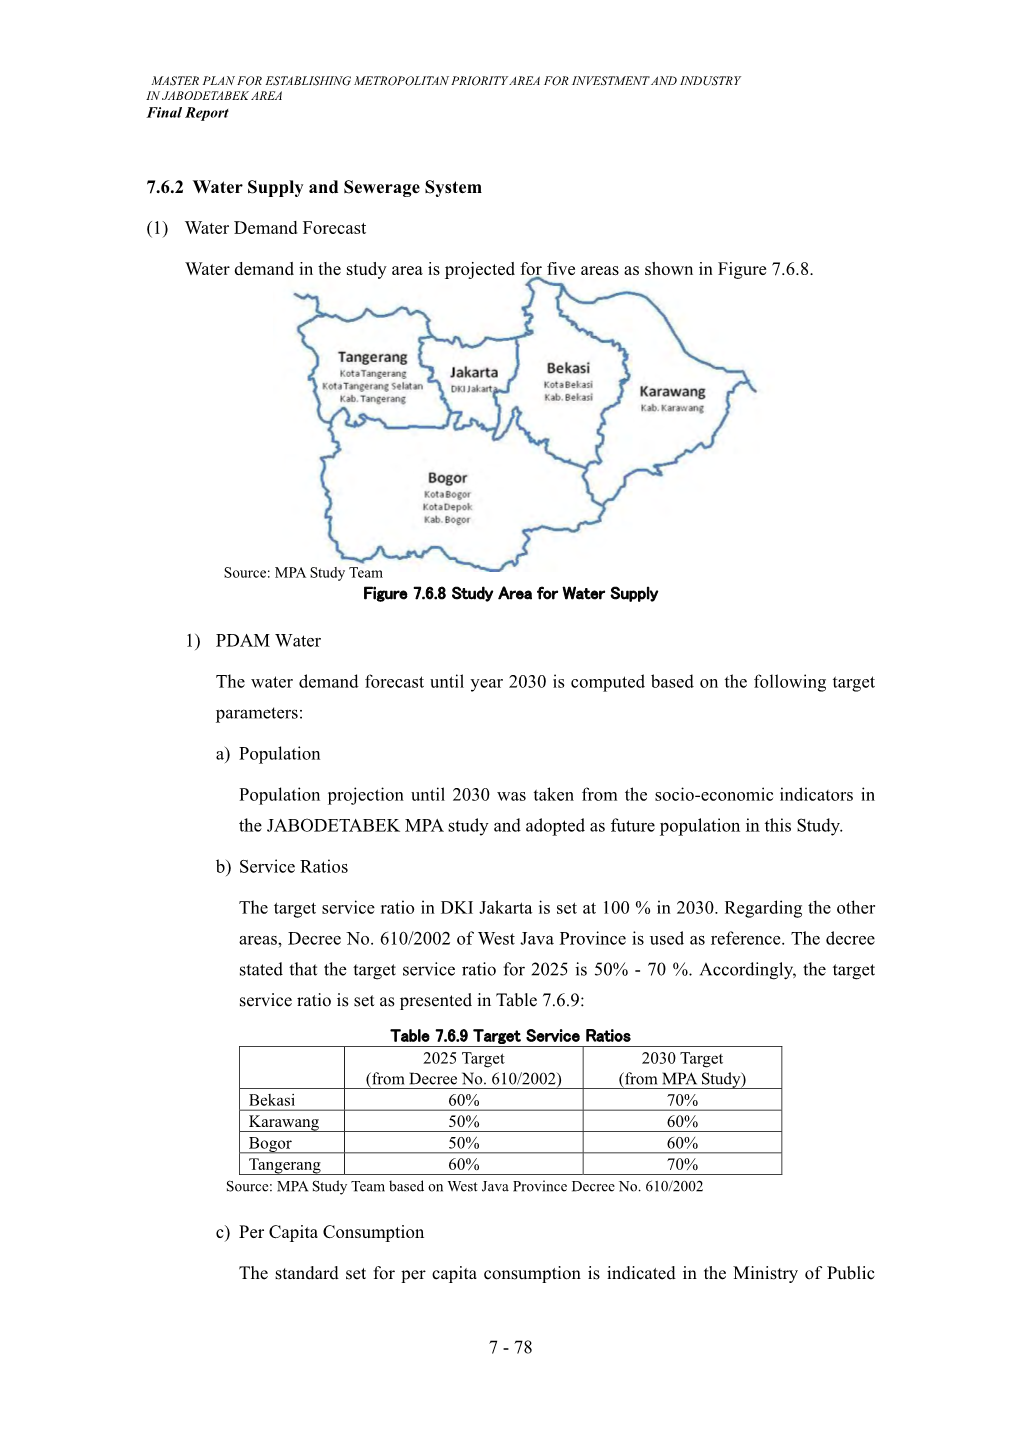 7.6.2 Water Supply and Sewerage System